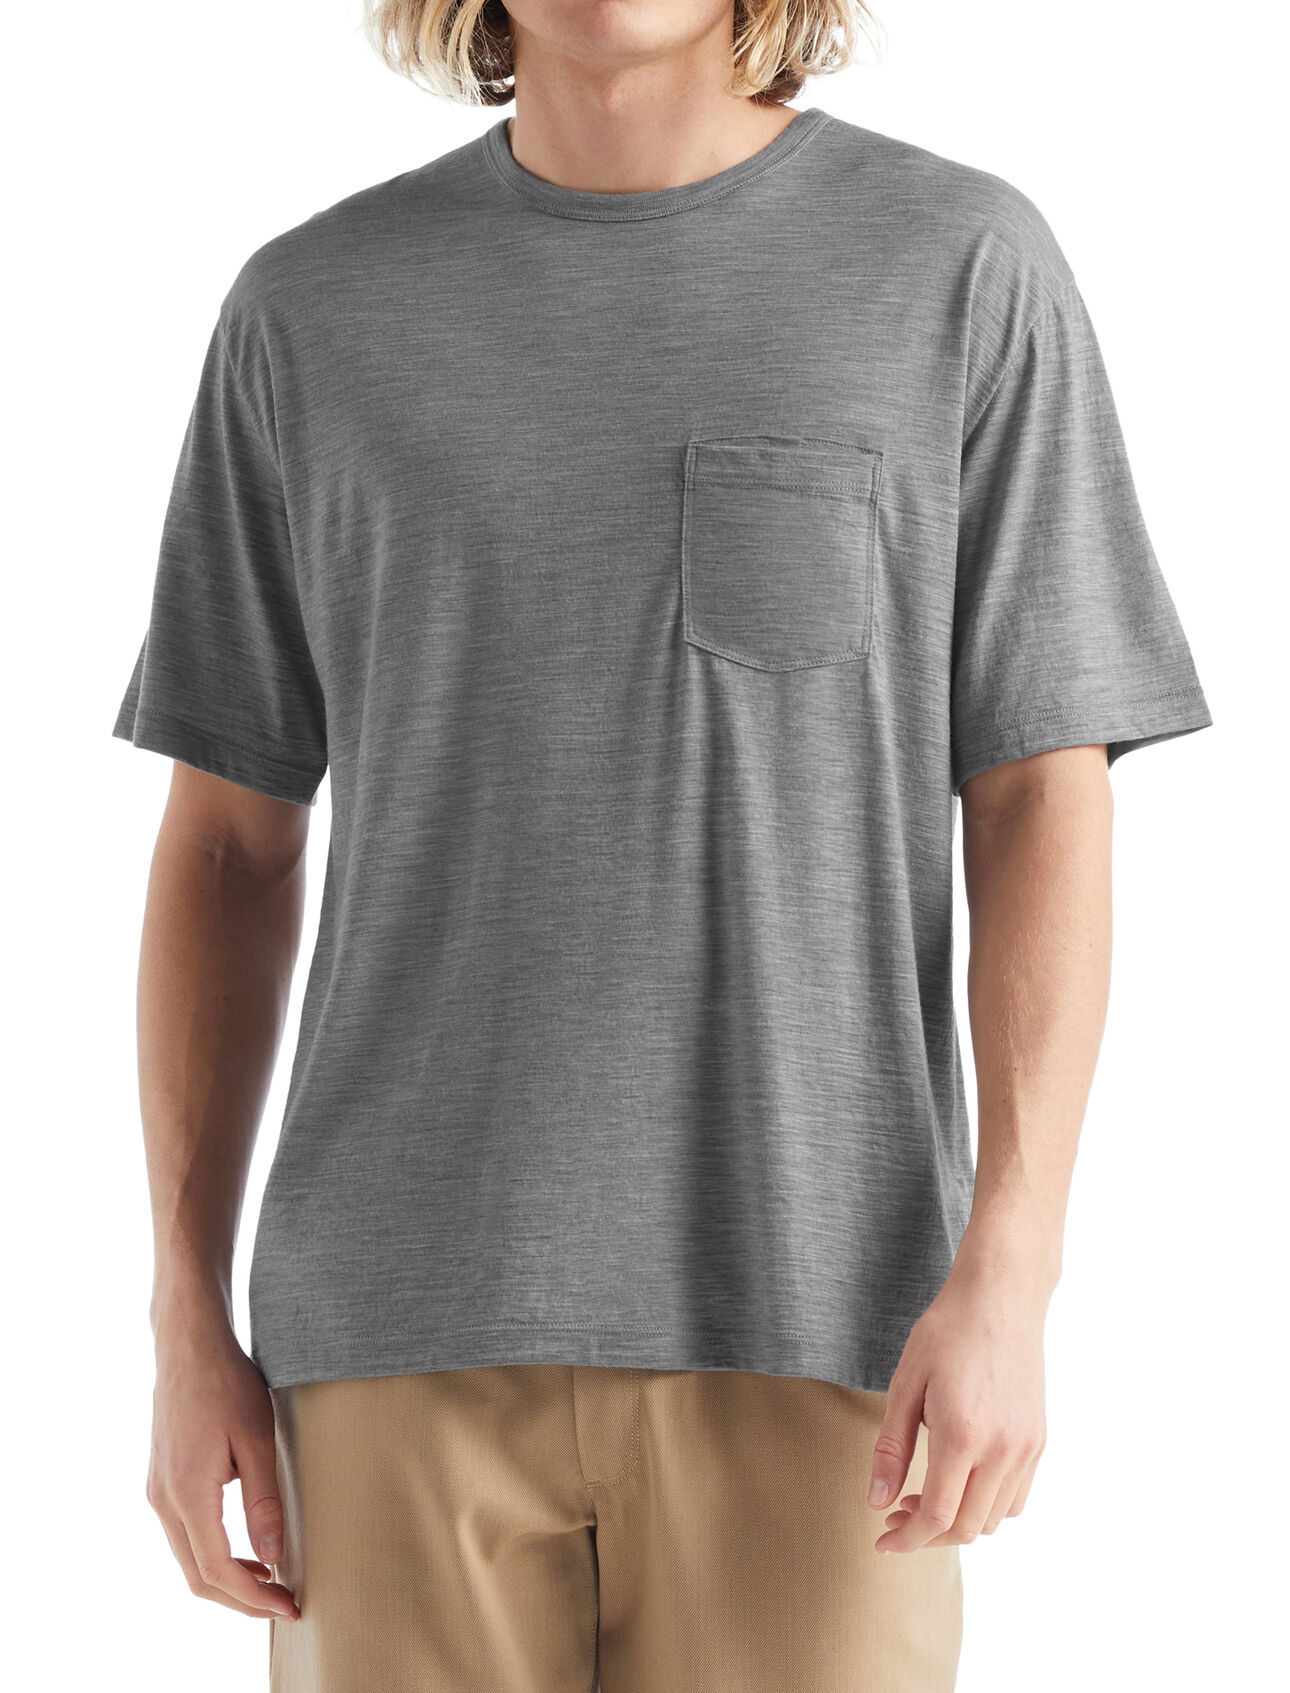 para hombre Merino Granary Short Sleeve Pocket T-Shirt A classic pocket tee with a relaxed fit and soft, breathable, 100% merino wool fabric, the Granary Short Sleeve Pocket Tee is all about everyday comfort and style.